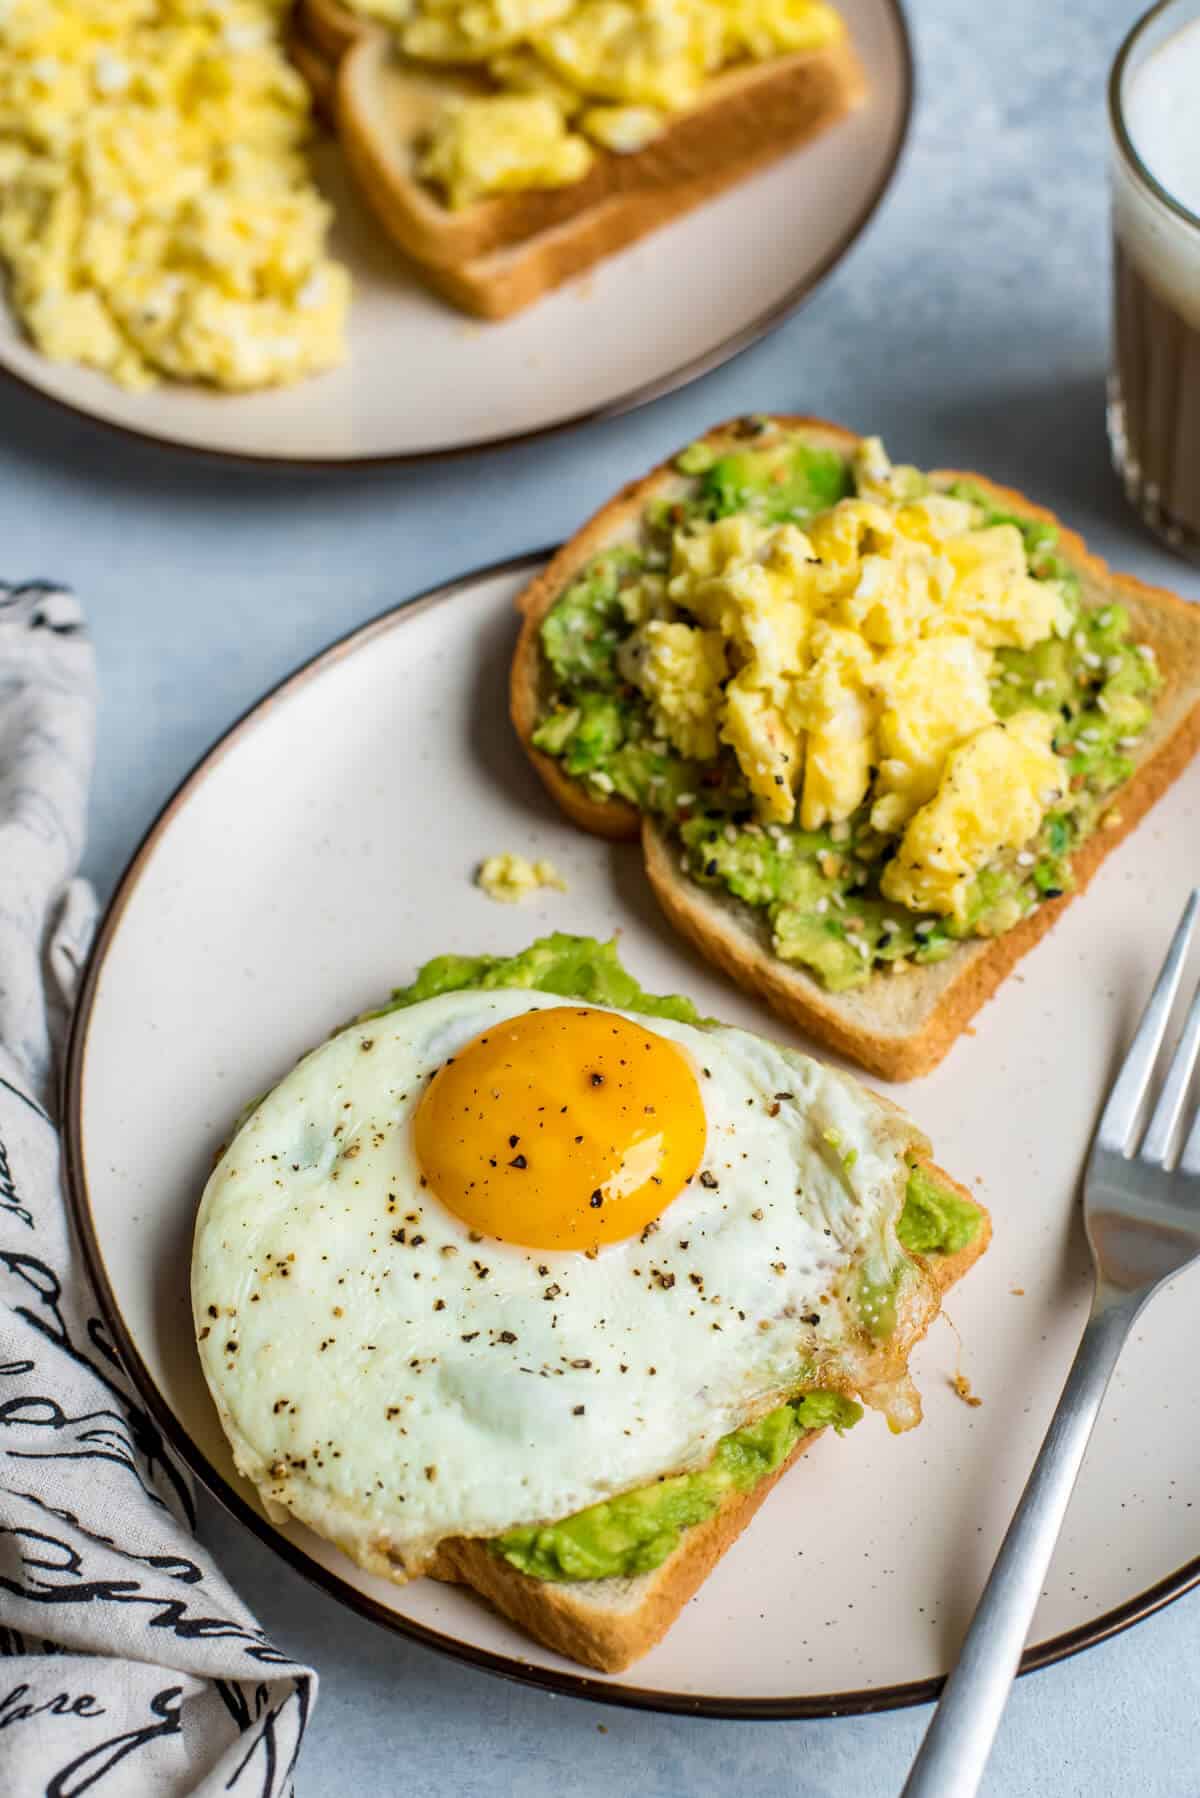 Two slices of toast topped with avocado and egg - one with a fried egg, another with scrambled eggs.